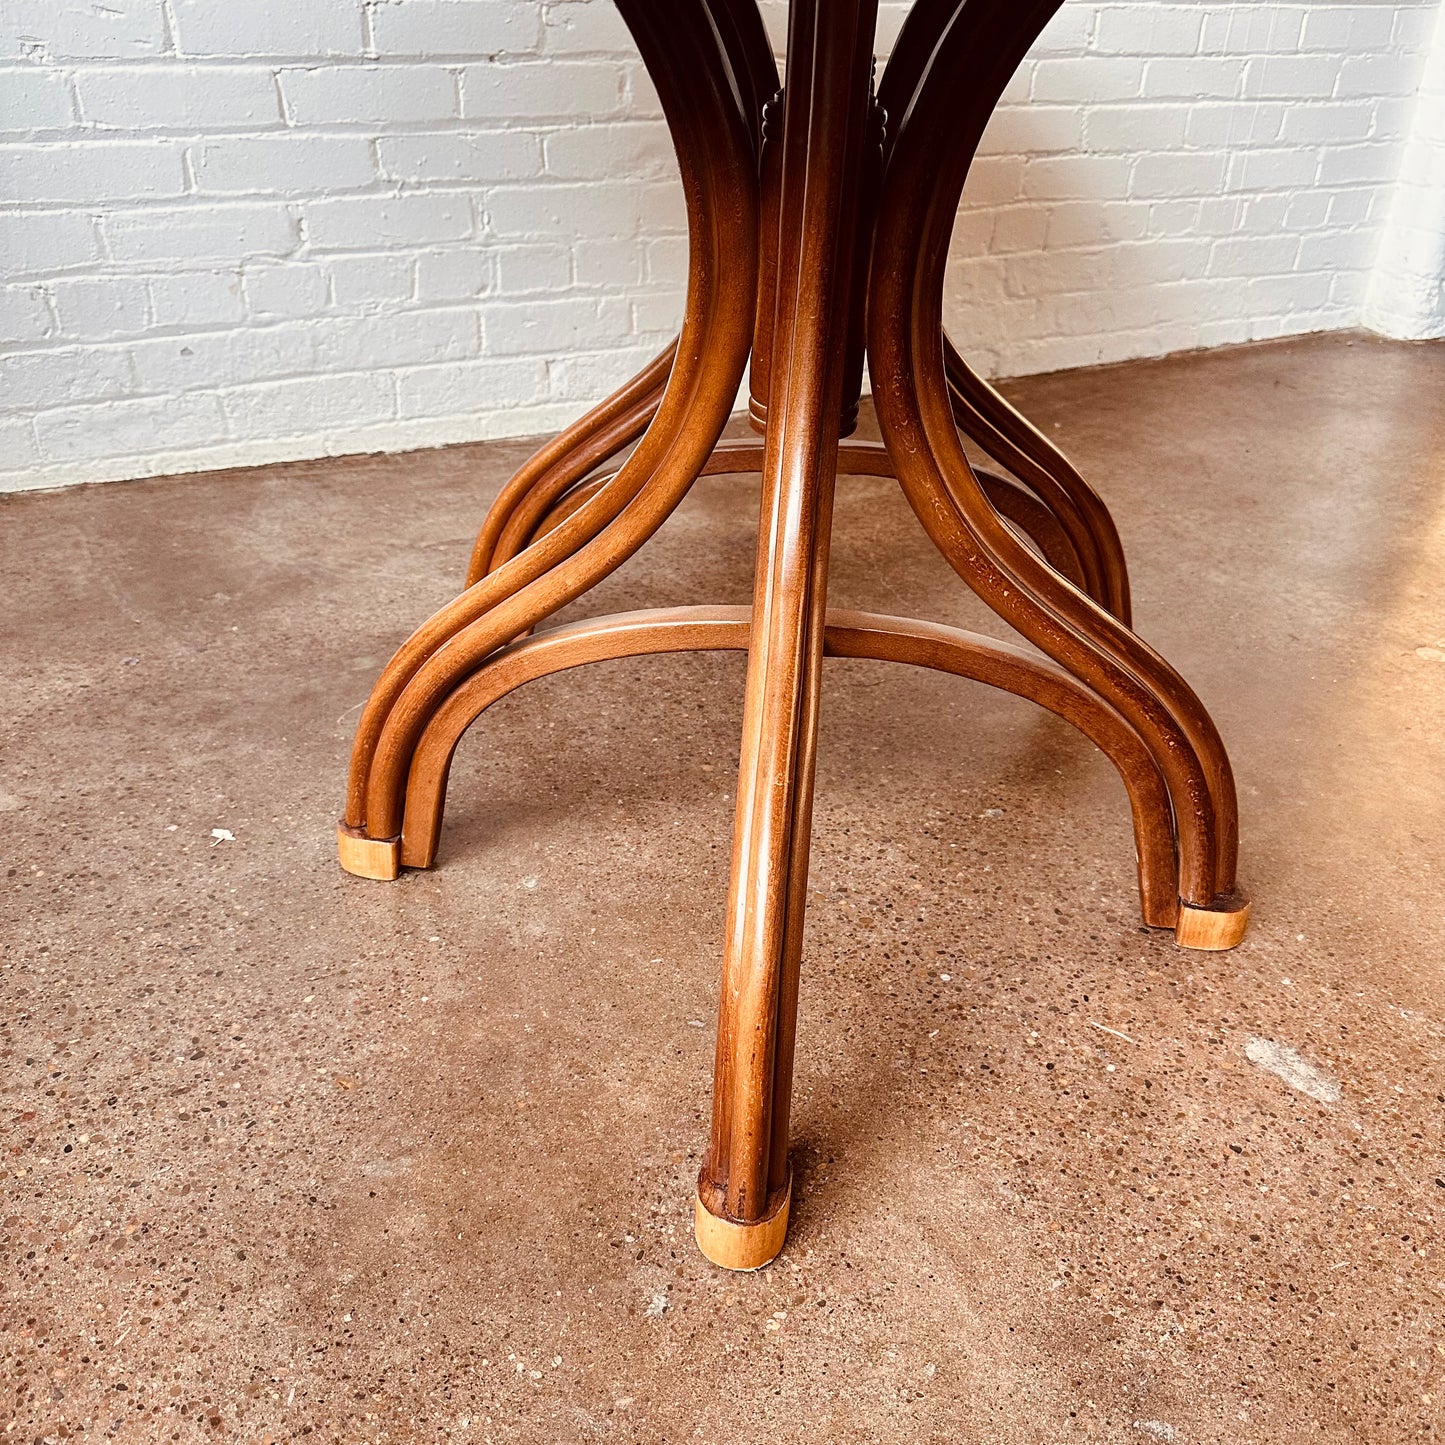 THONET BENTWOOD OVAL DINING TABLE FROM EARLY 20TH CENTURY